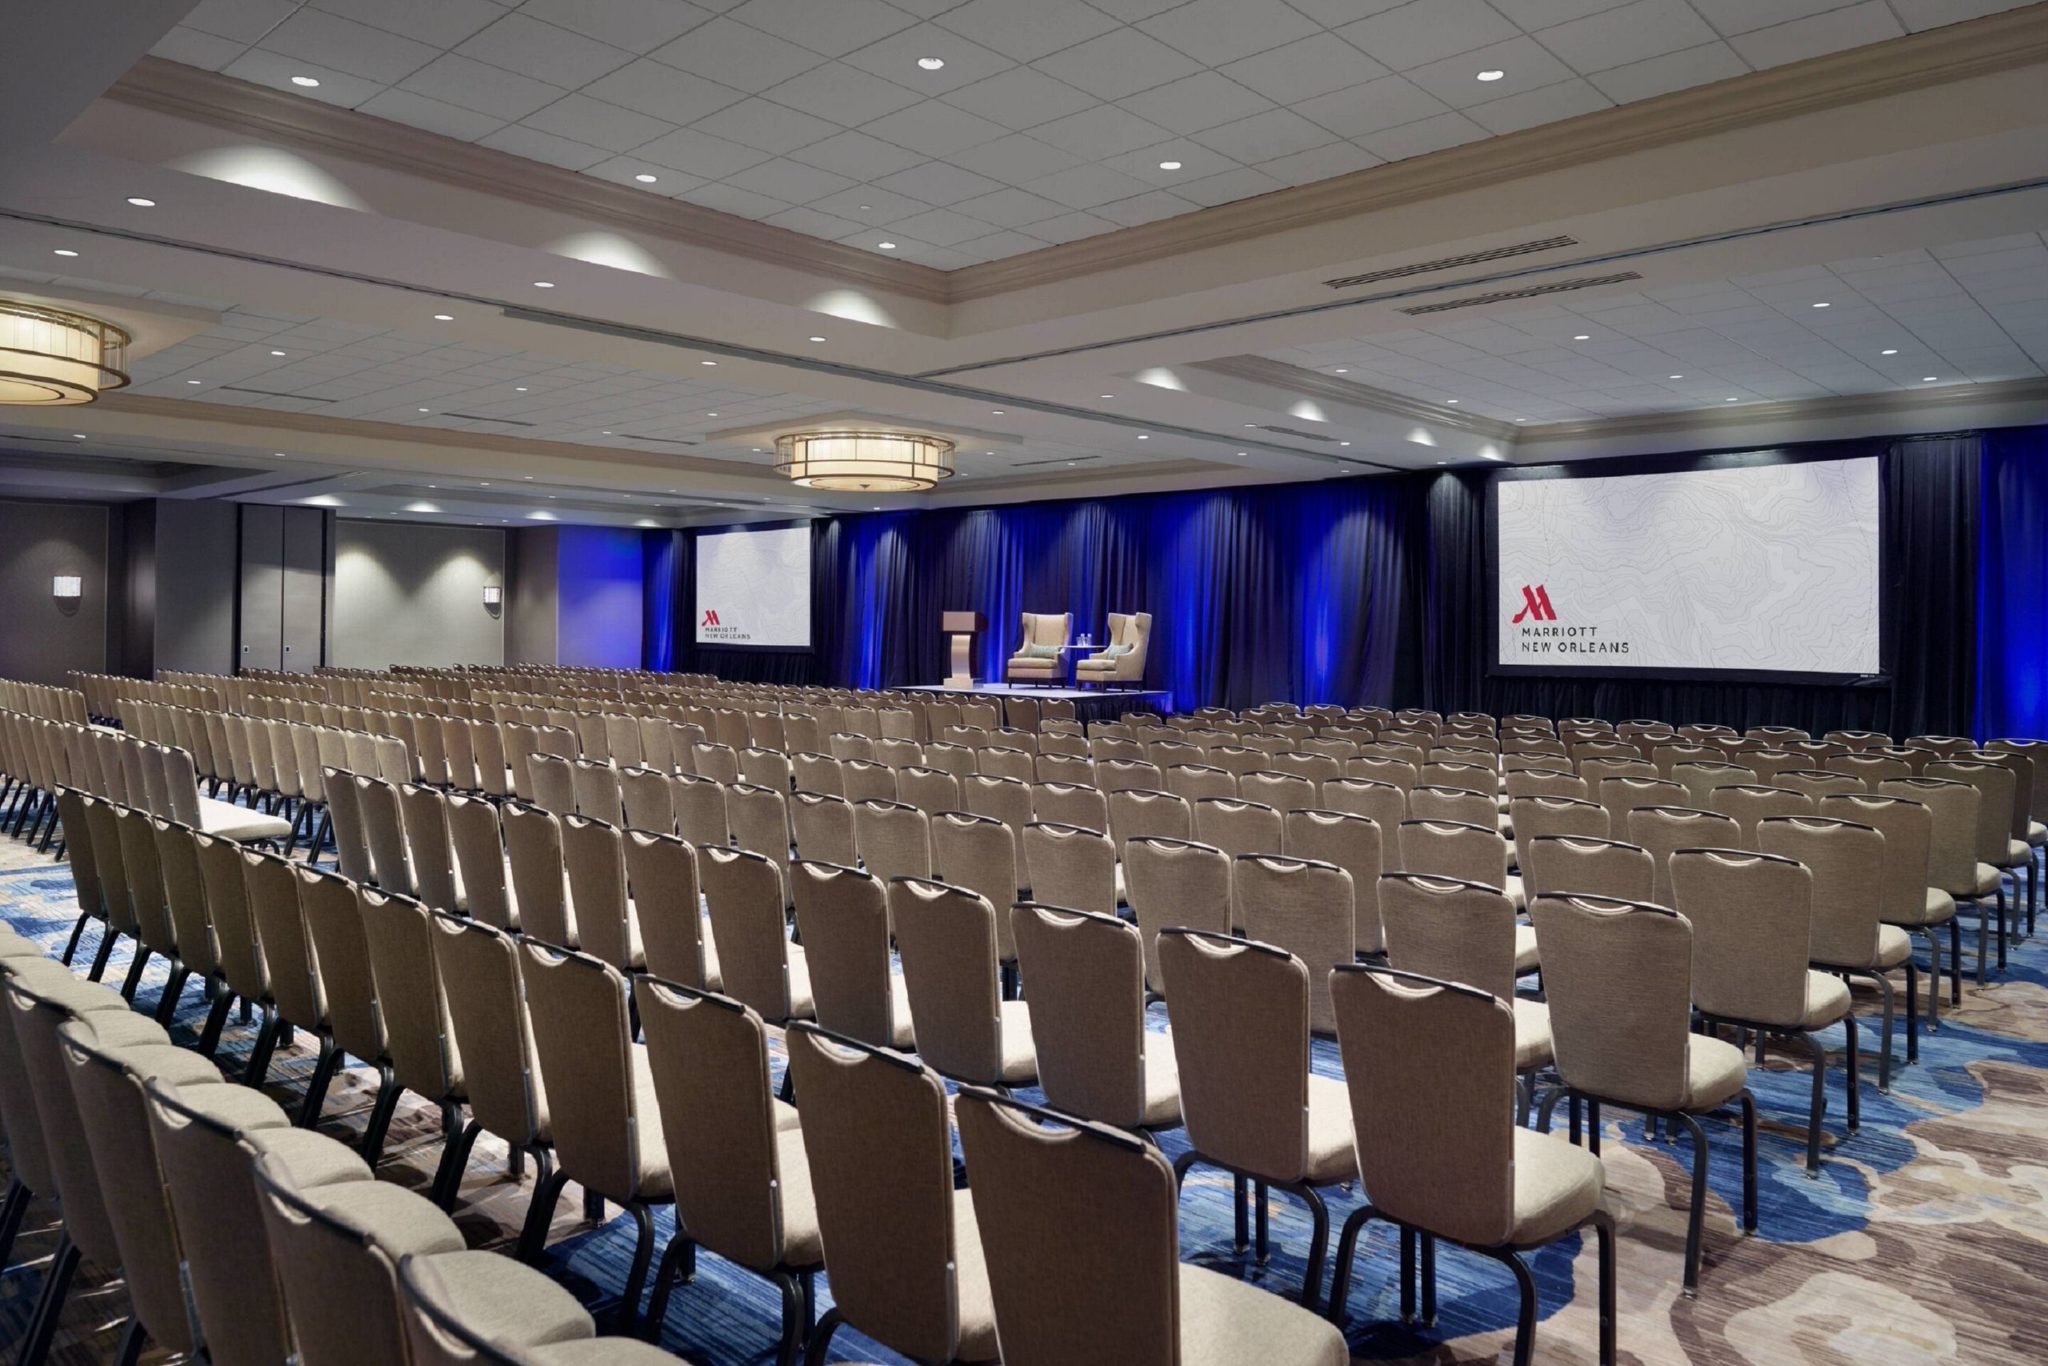 Interior of the New Orleans Marriott conference center